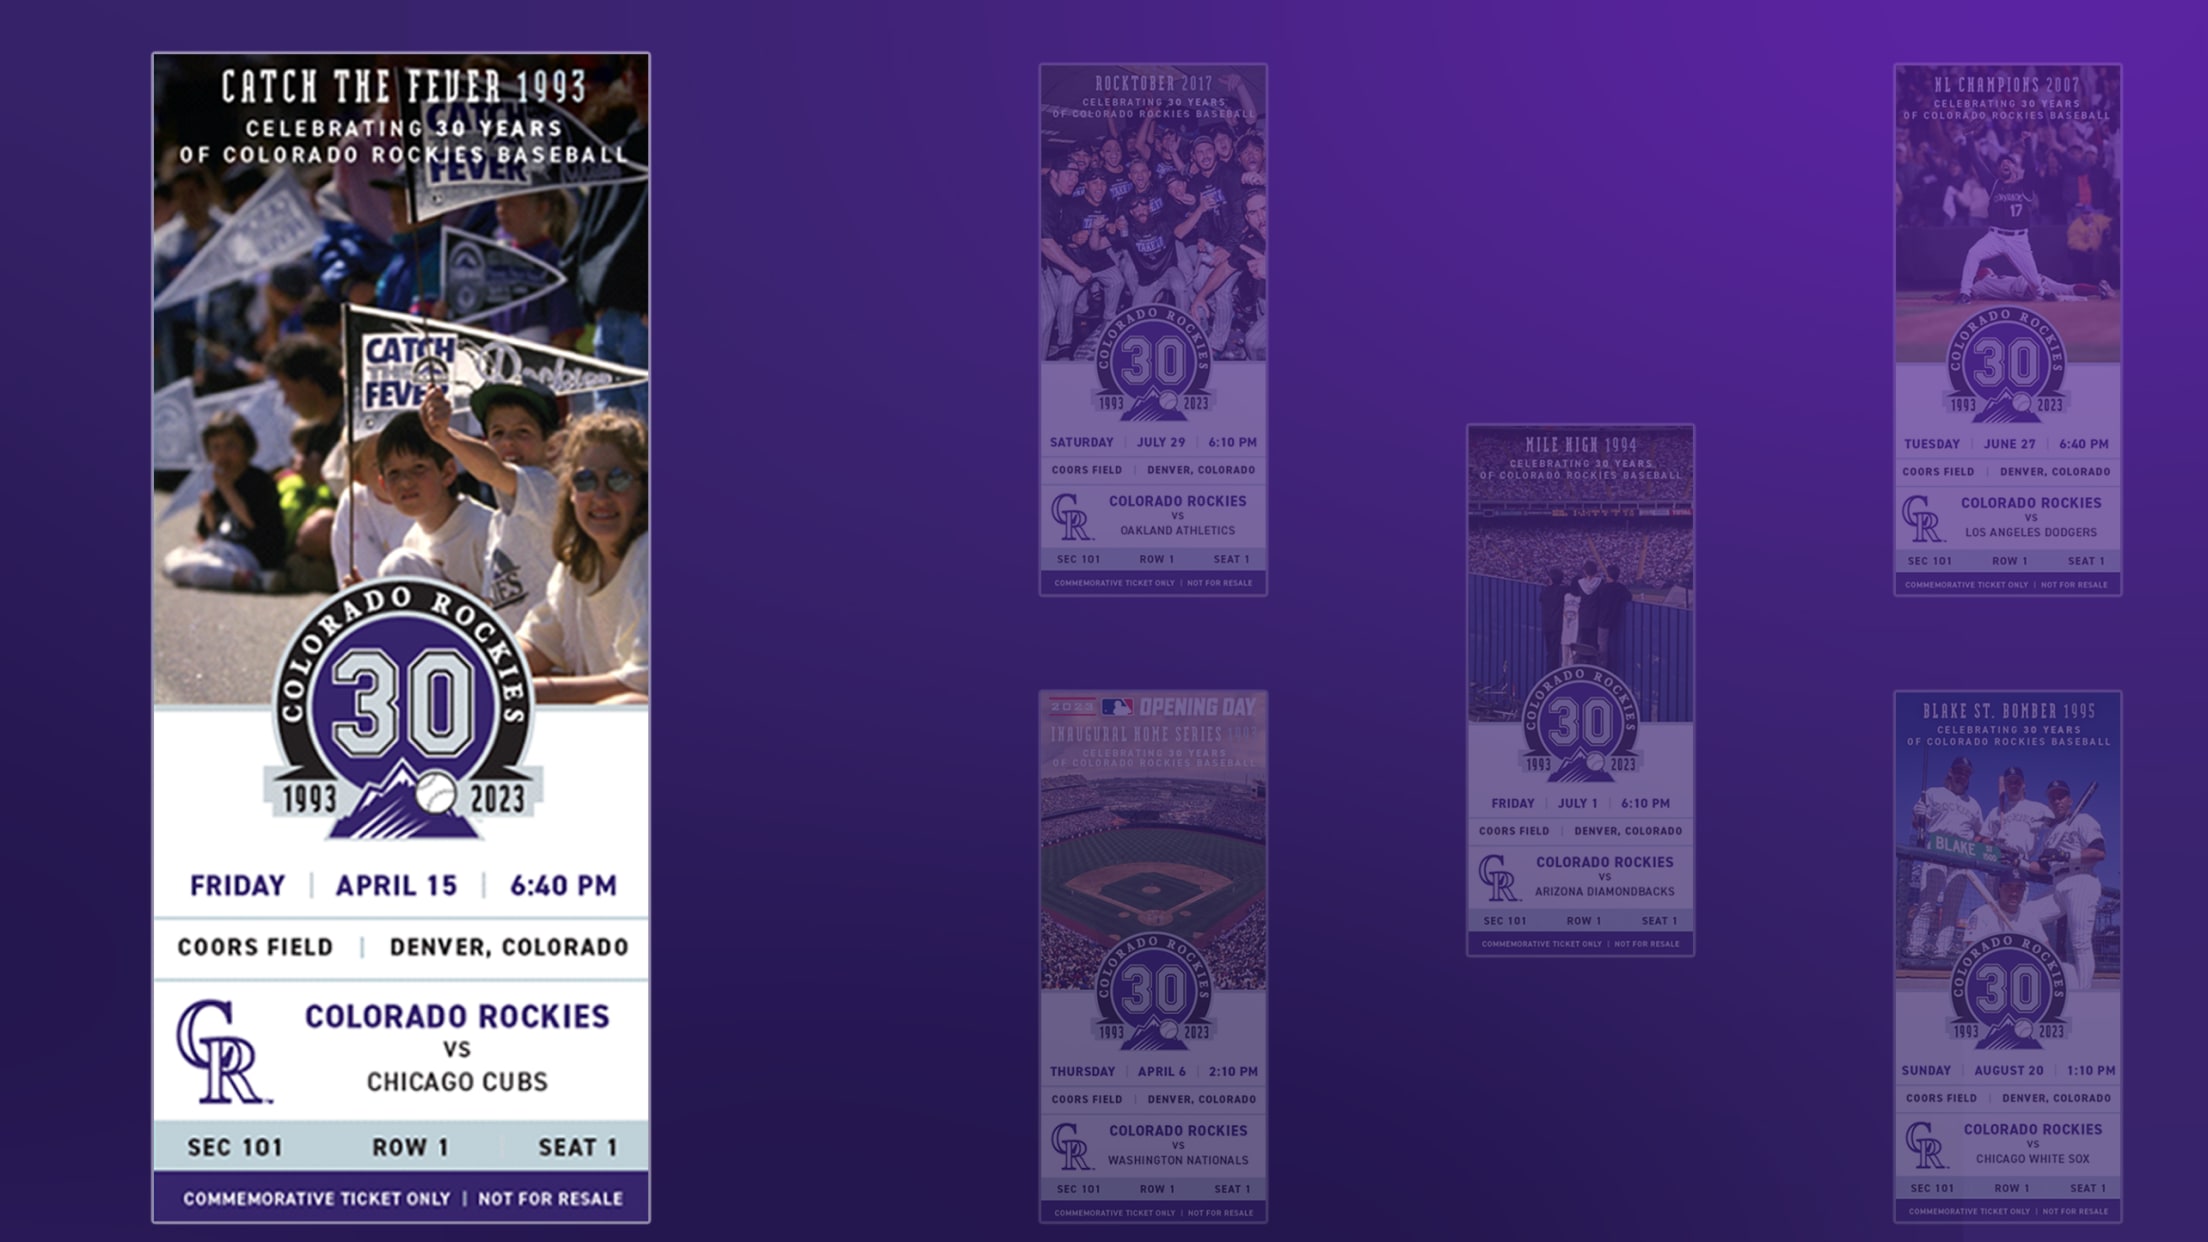 Colorado Rockies to Celebrate 30th Anniversary in 2023